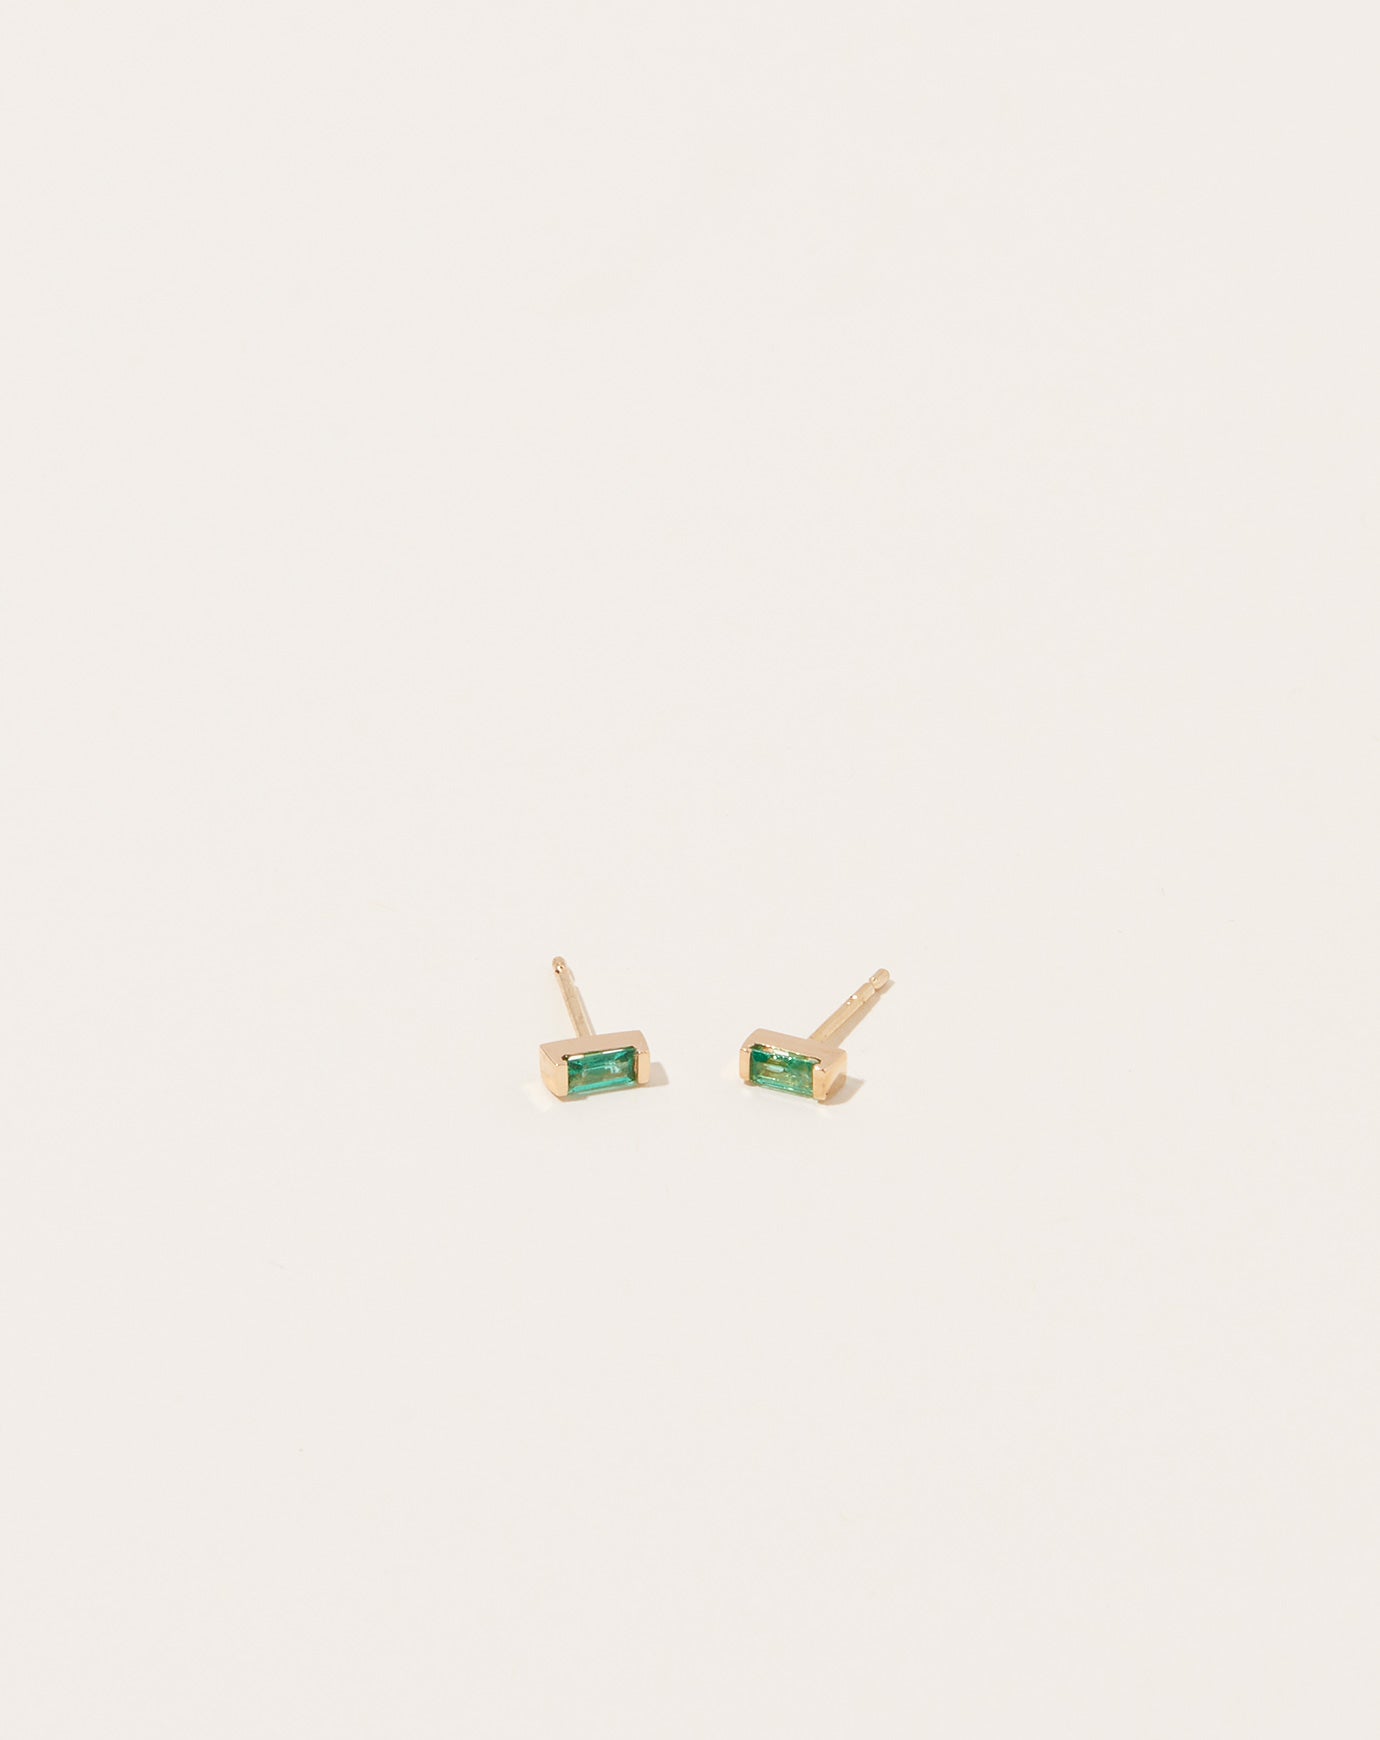 Selin Kent Galana Studs with Emeralds in 14k Yellow Gold